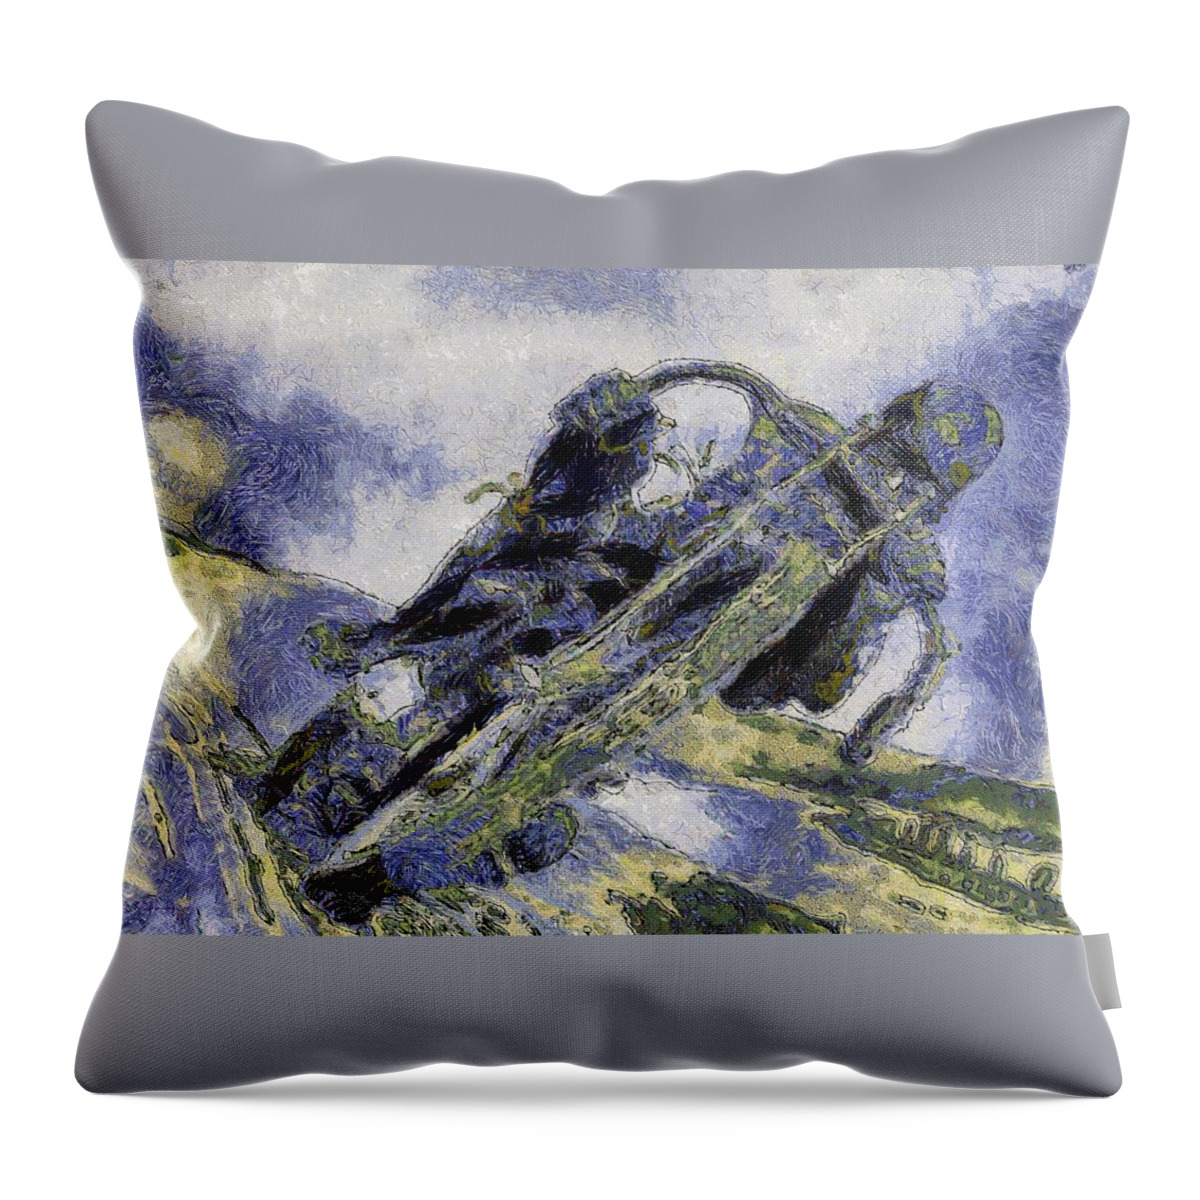 Harley-davidson Throw Pillow featuring the painting Ubiquitous Harley-Davidson Cult by Maciek Froncisz